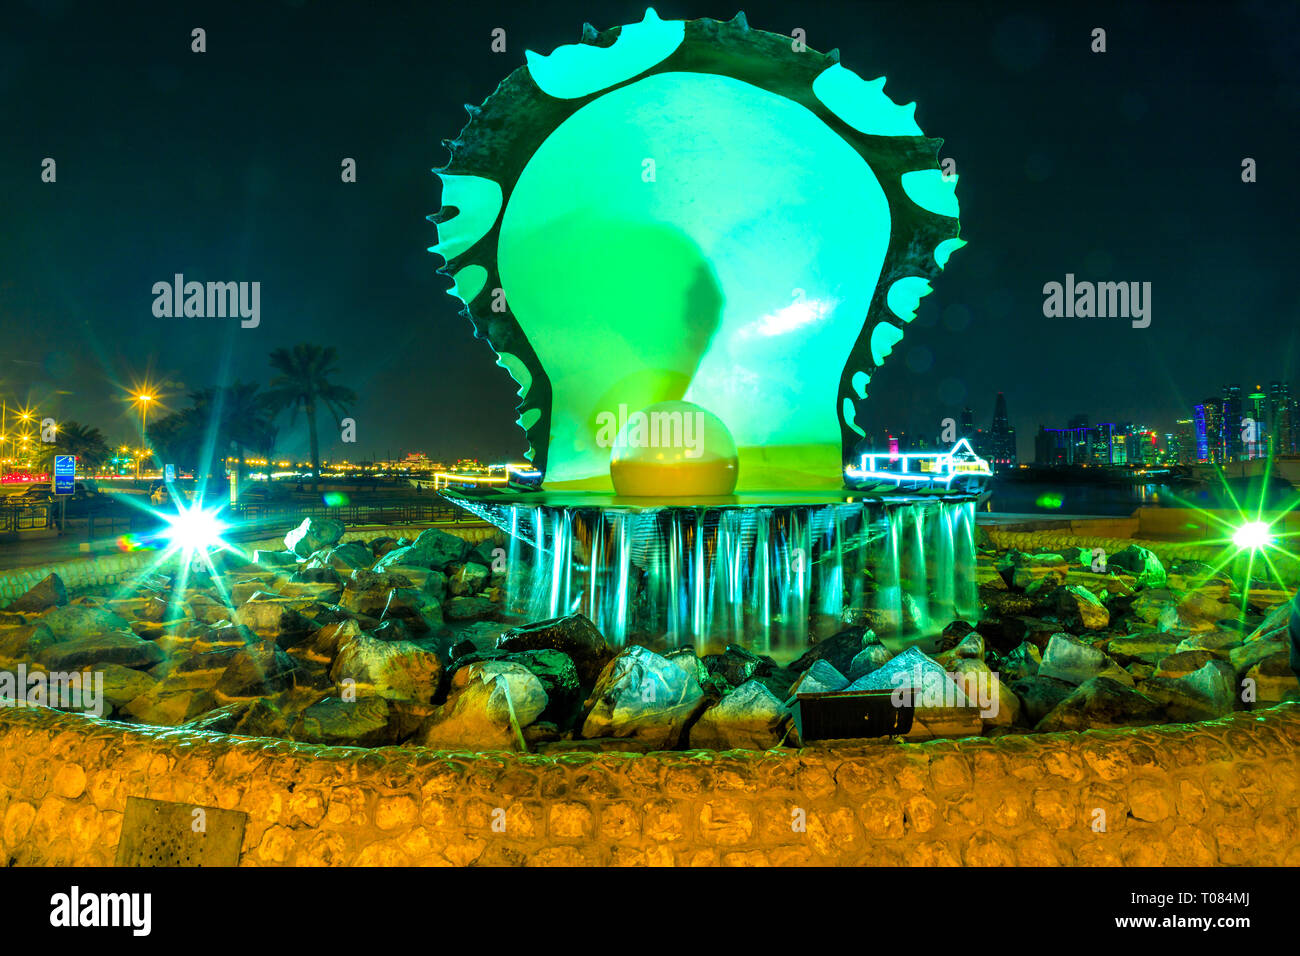 Doha, Qatar - February 23, 2019: iconic Oyster and Pearl Monument with fountain on Corniche seaside promenade at beginning of Dhow Harbor illuminated Stock Photo